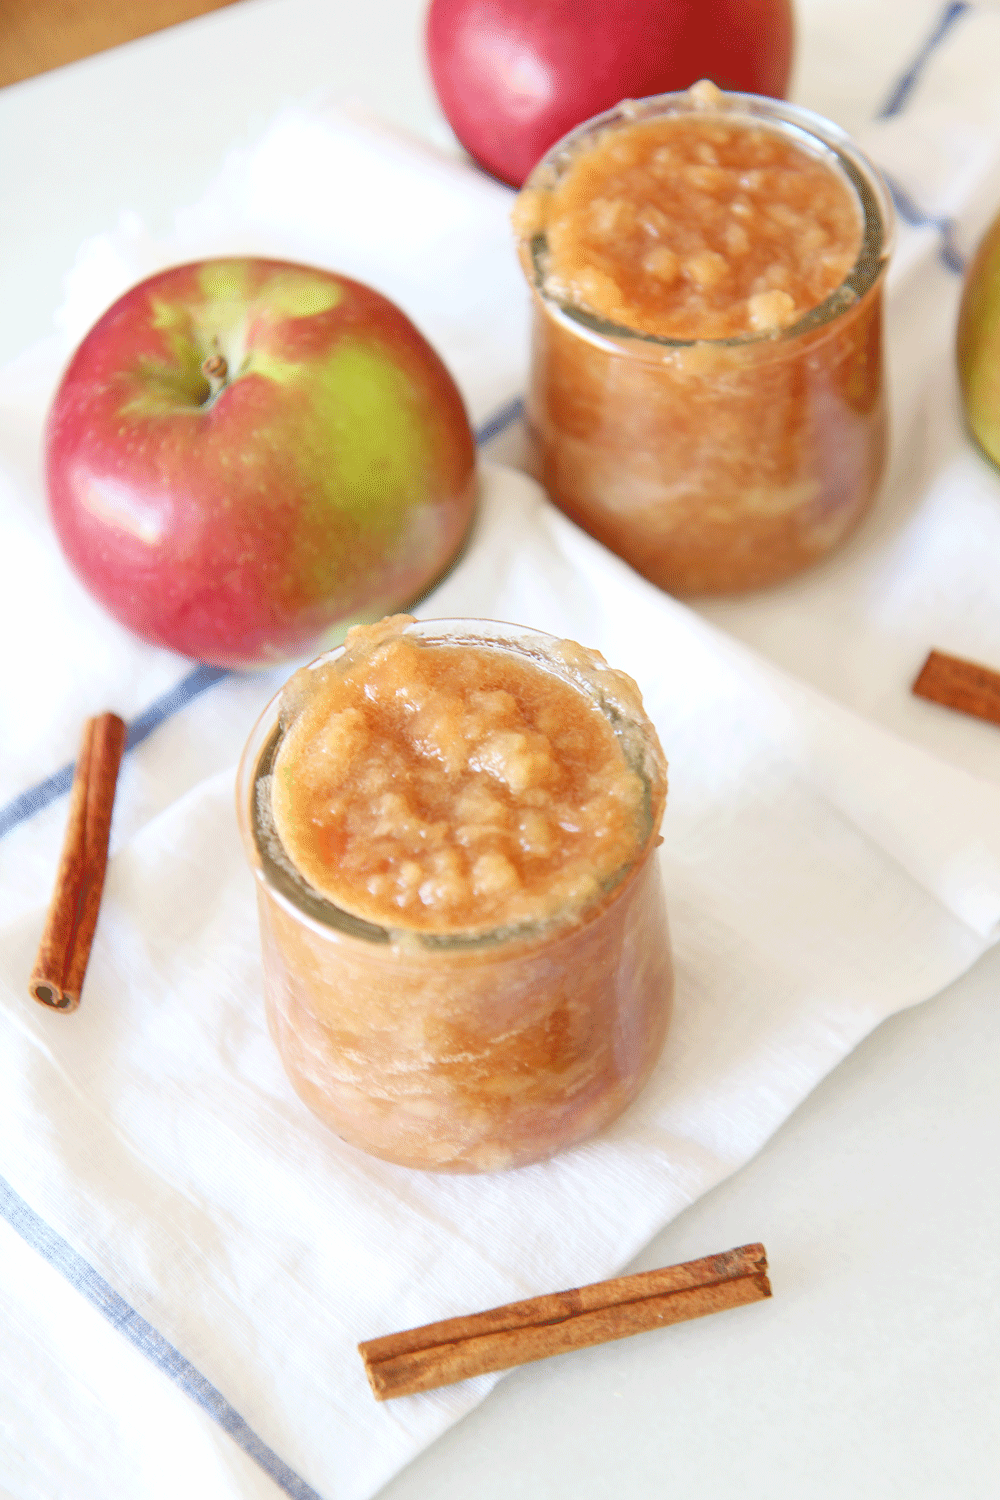 How to Make Applesauce in a Slow Cooker. Apples, butter, brown sugar, cinnamon, orange juice, and salt are all you need. This is an easy slow cooker recipe for fall or Hanukkah. Happy apple cooking! www.ChopHappy.com #applerecipes #applesauce